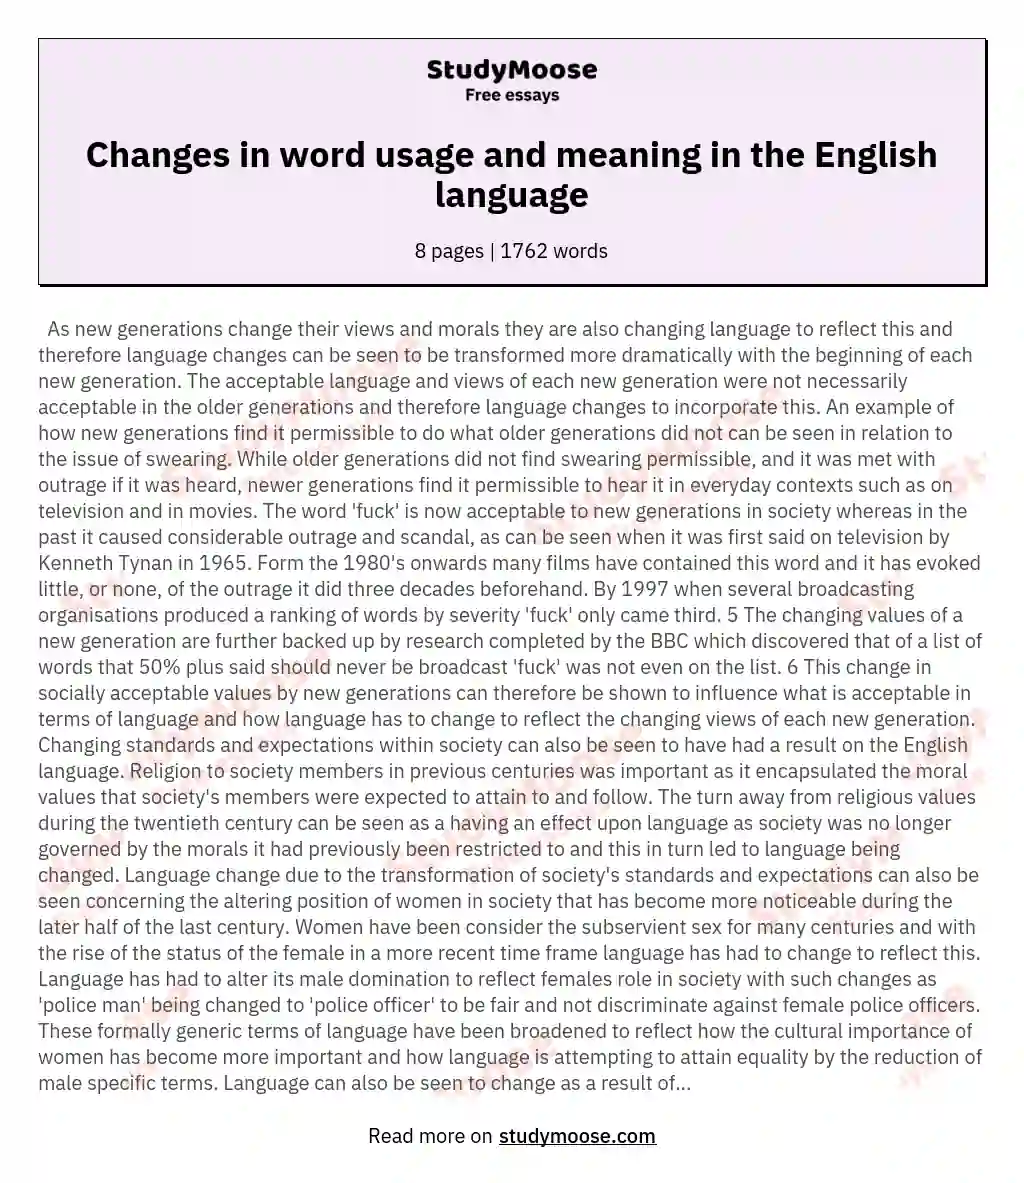 Changes in word usage and meaning in the English language essay